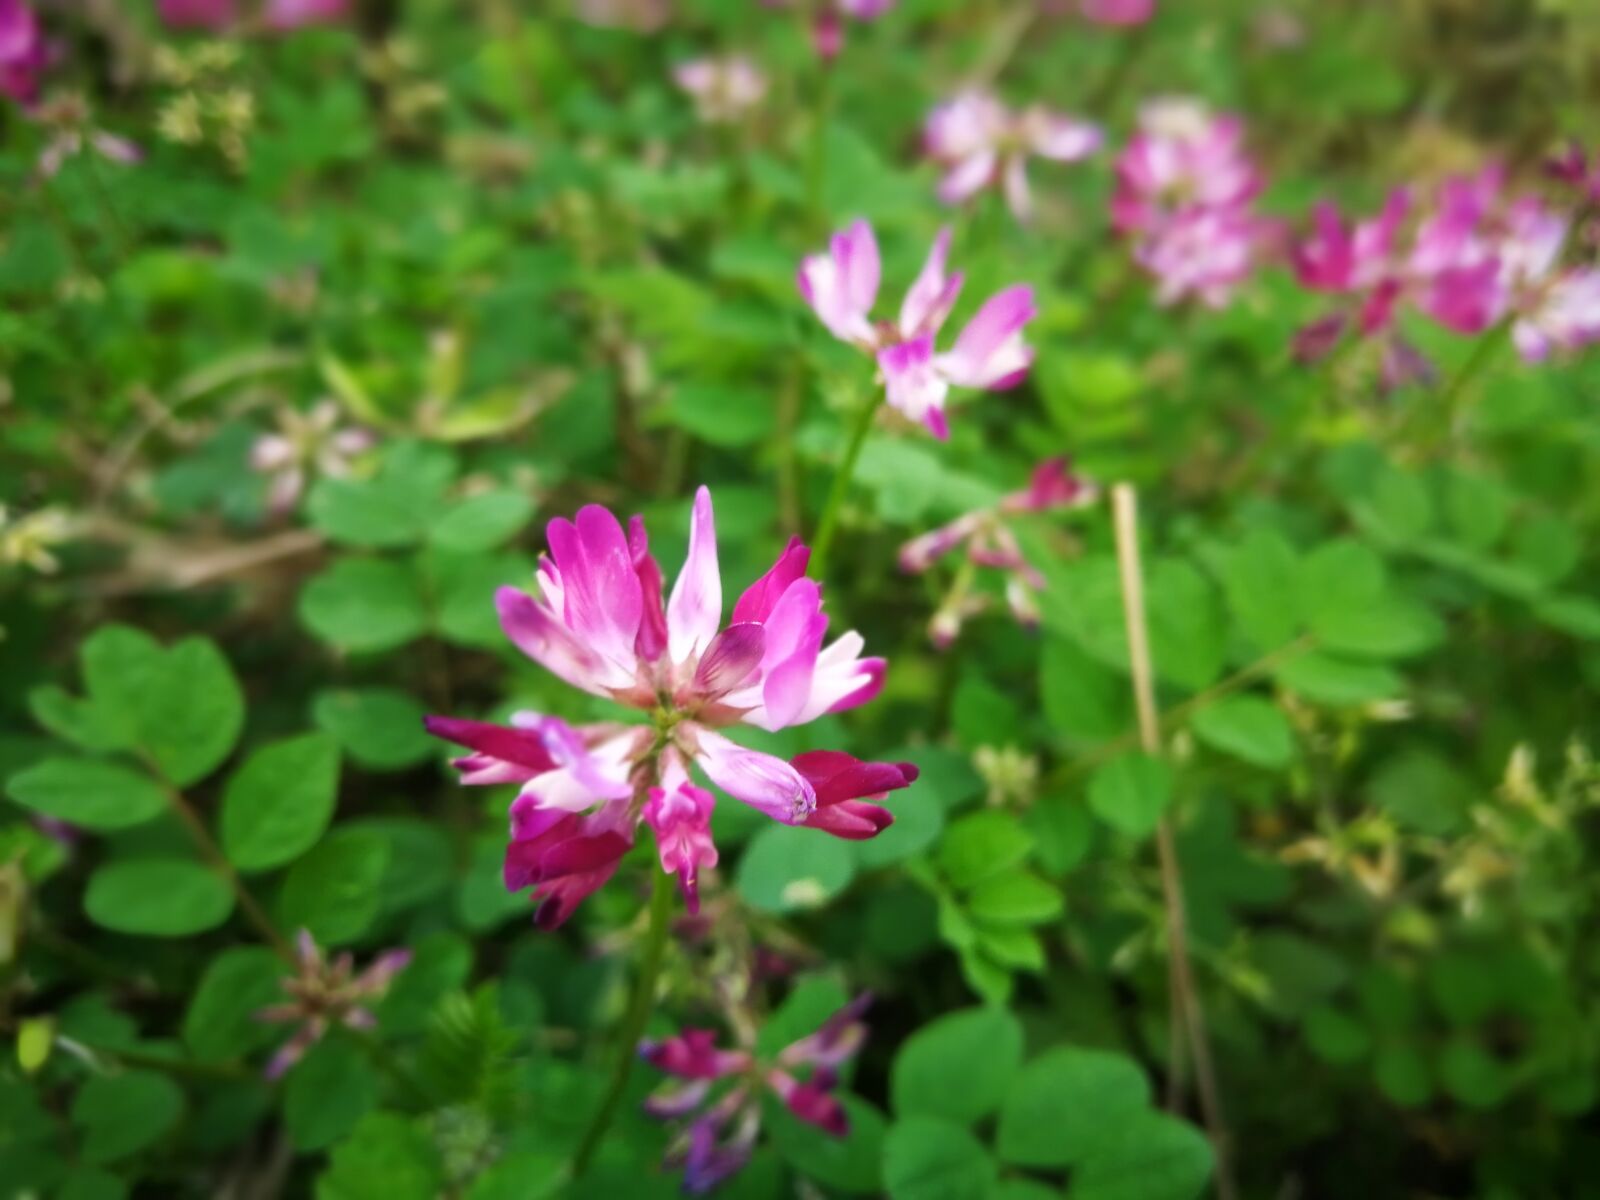 HUAWEI P10 sample photo. Spring, flower, nature photography